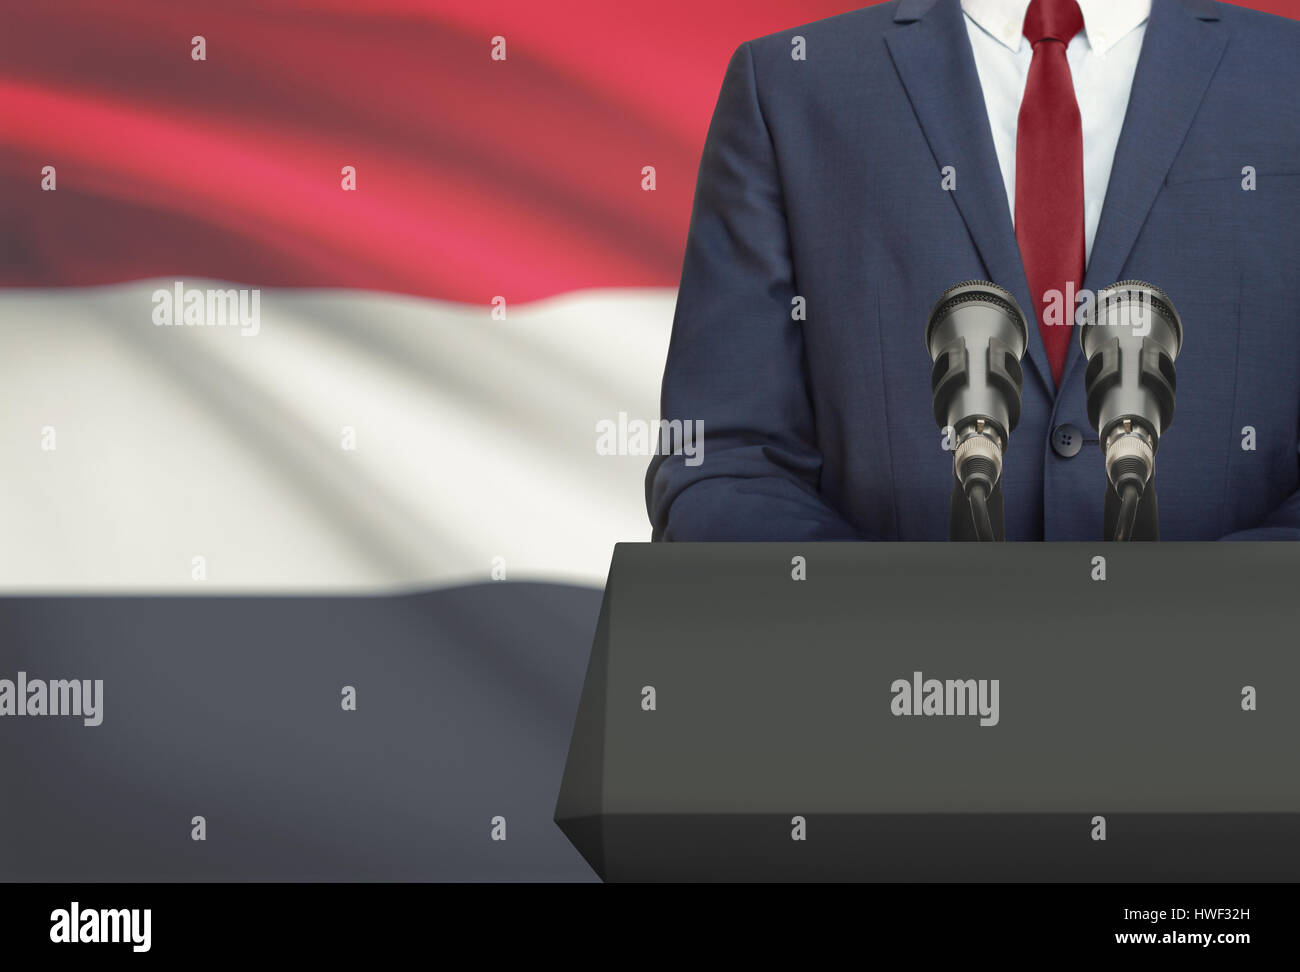 Businessman or politician making speech from behind the pulpit with national flag on background - Yemen Stock Photo